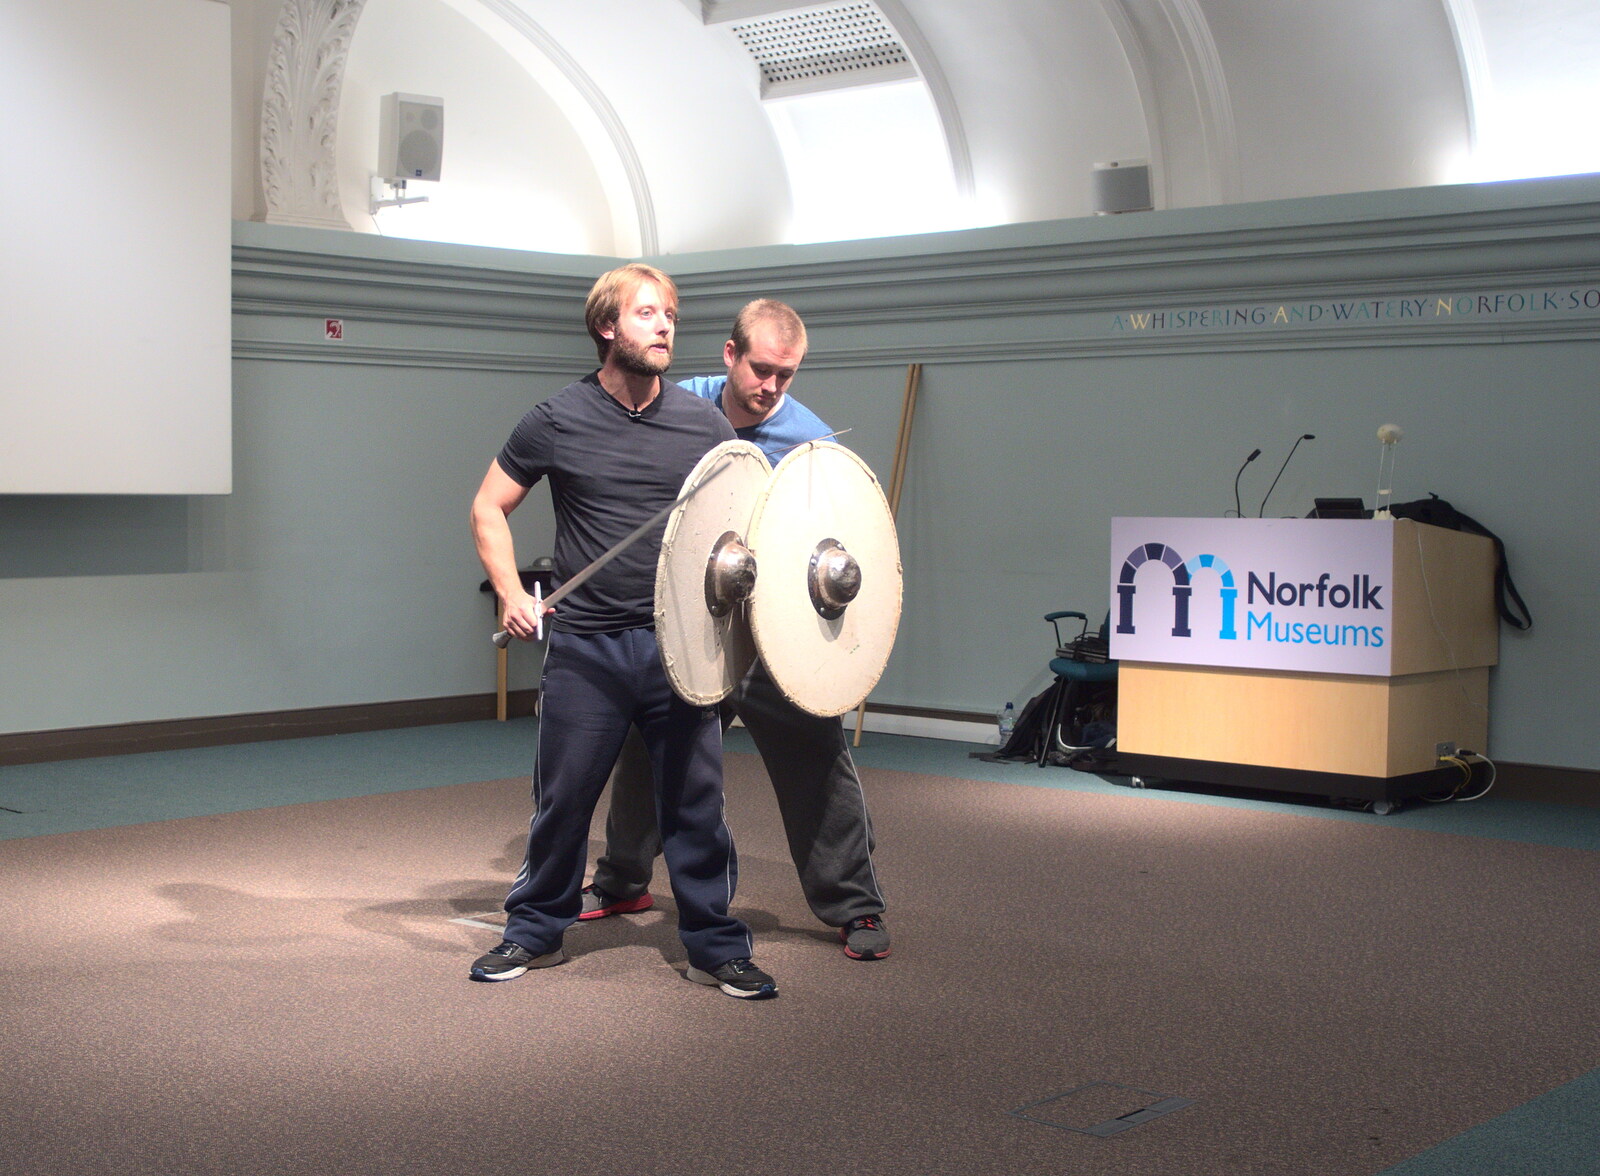 Swordfights at Norwich Castle, Norwich, Norfolk - 31st August 2016: The guys demonstrate shield techniques